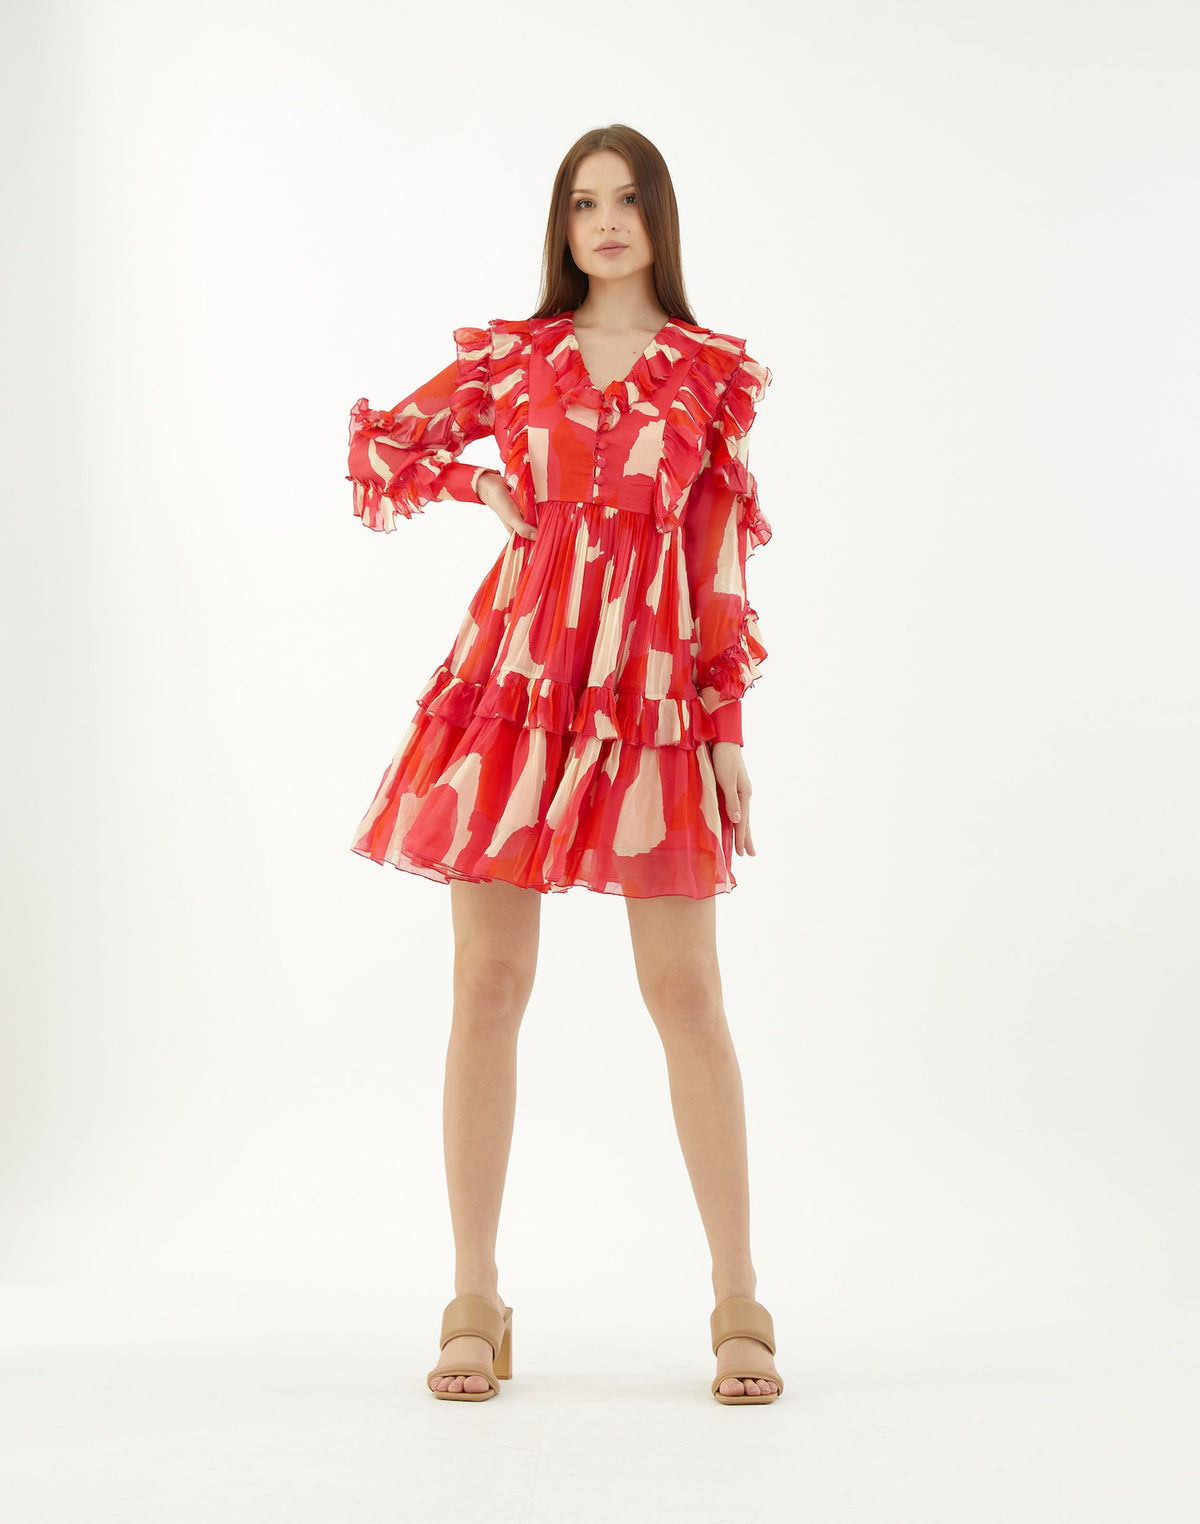 HOT PINK, RED AND BEIGE ABSTRACT FRILL SHORT DRESS